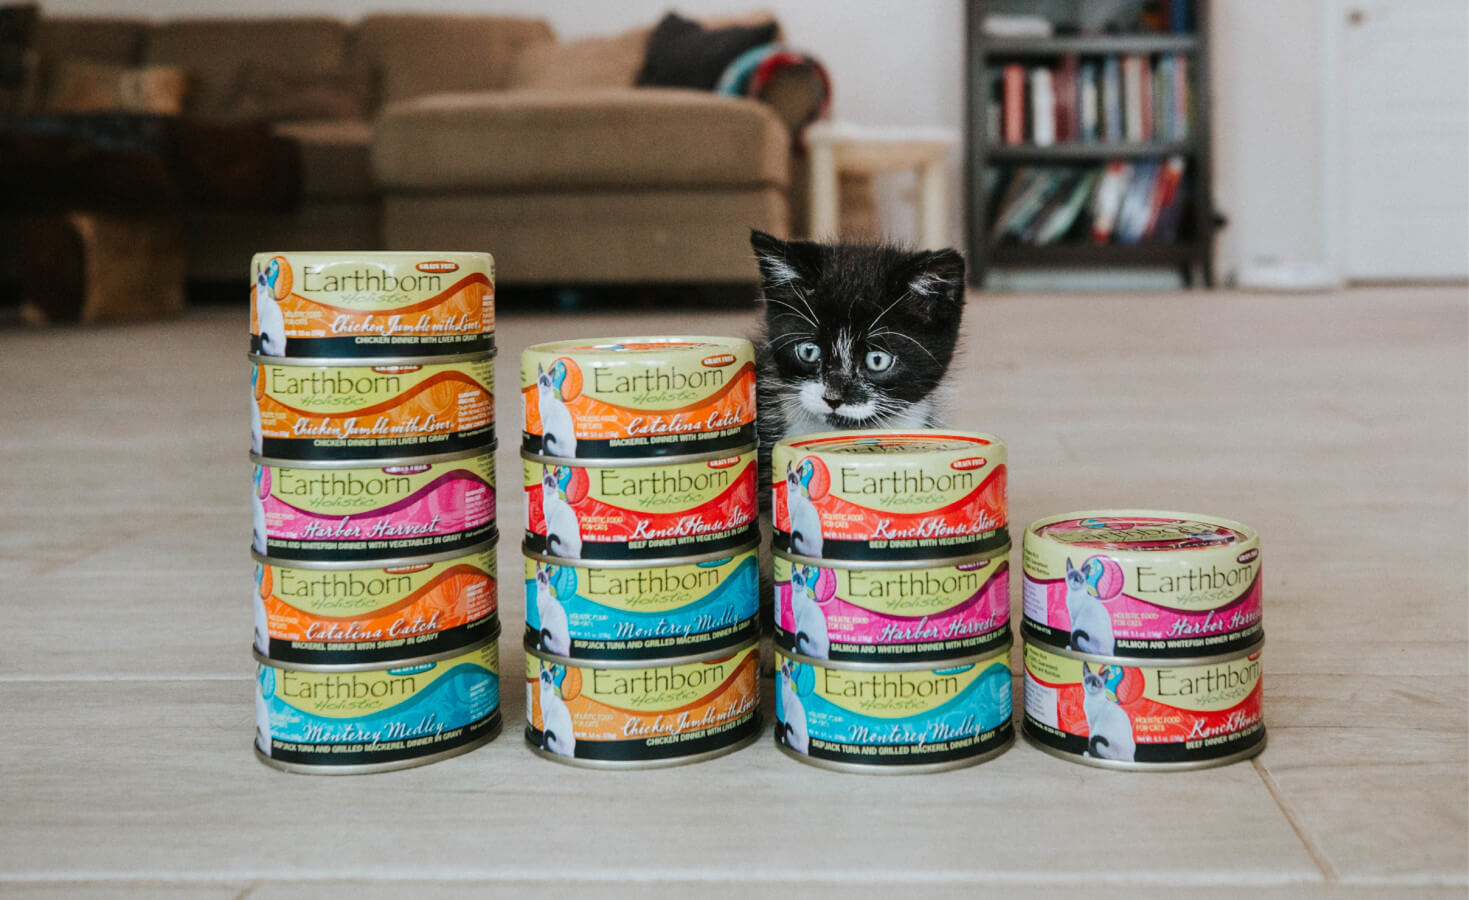 A kitten peeks out from behind several stacks of Earthborn Holistic wet kitten food